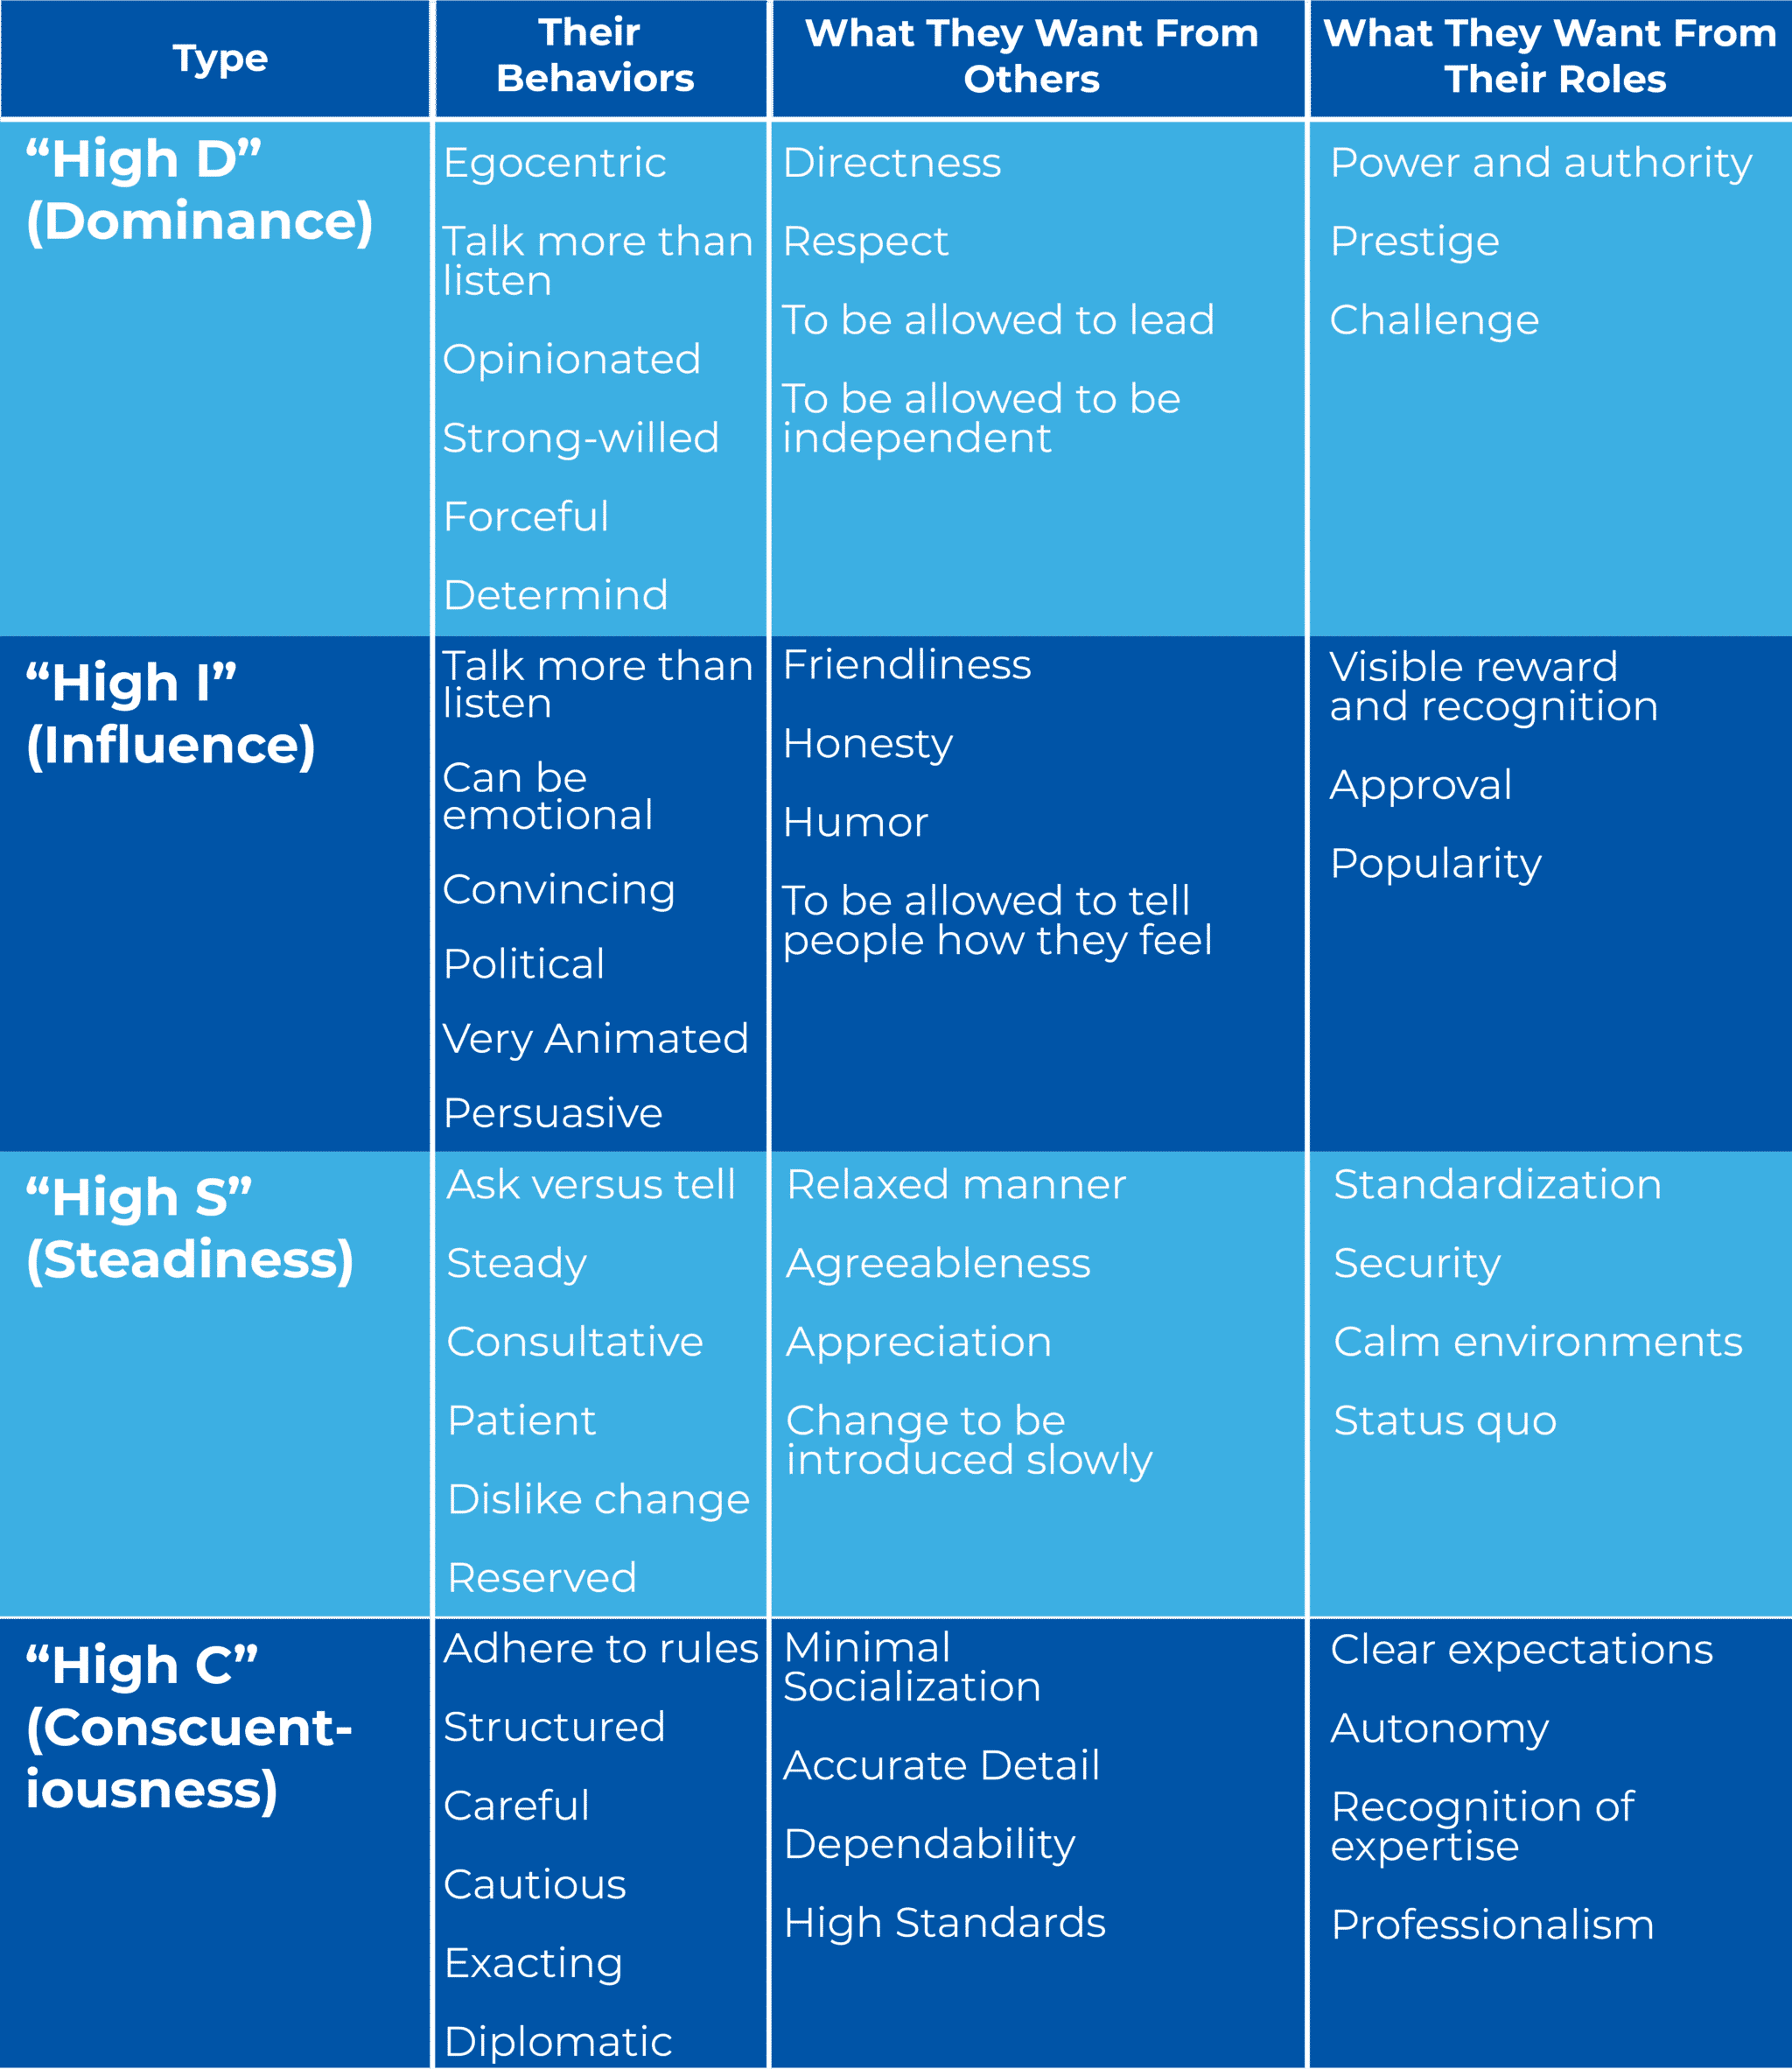 SUMMARY OF TRAITS OF EACH DiSC PERSONALITY TYPES